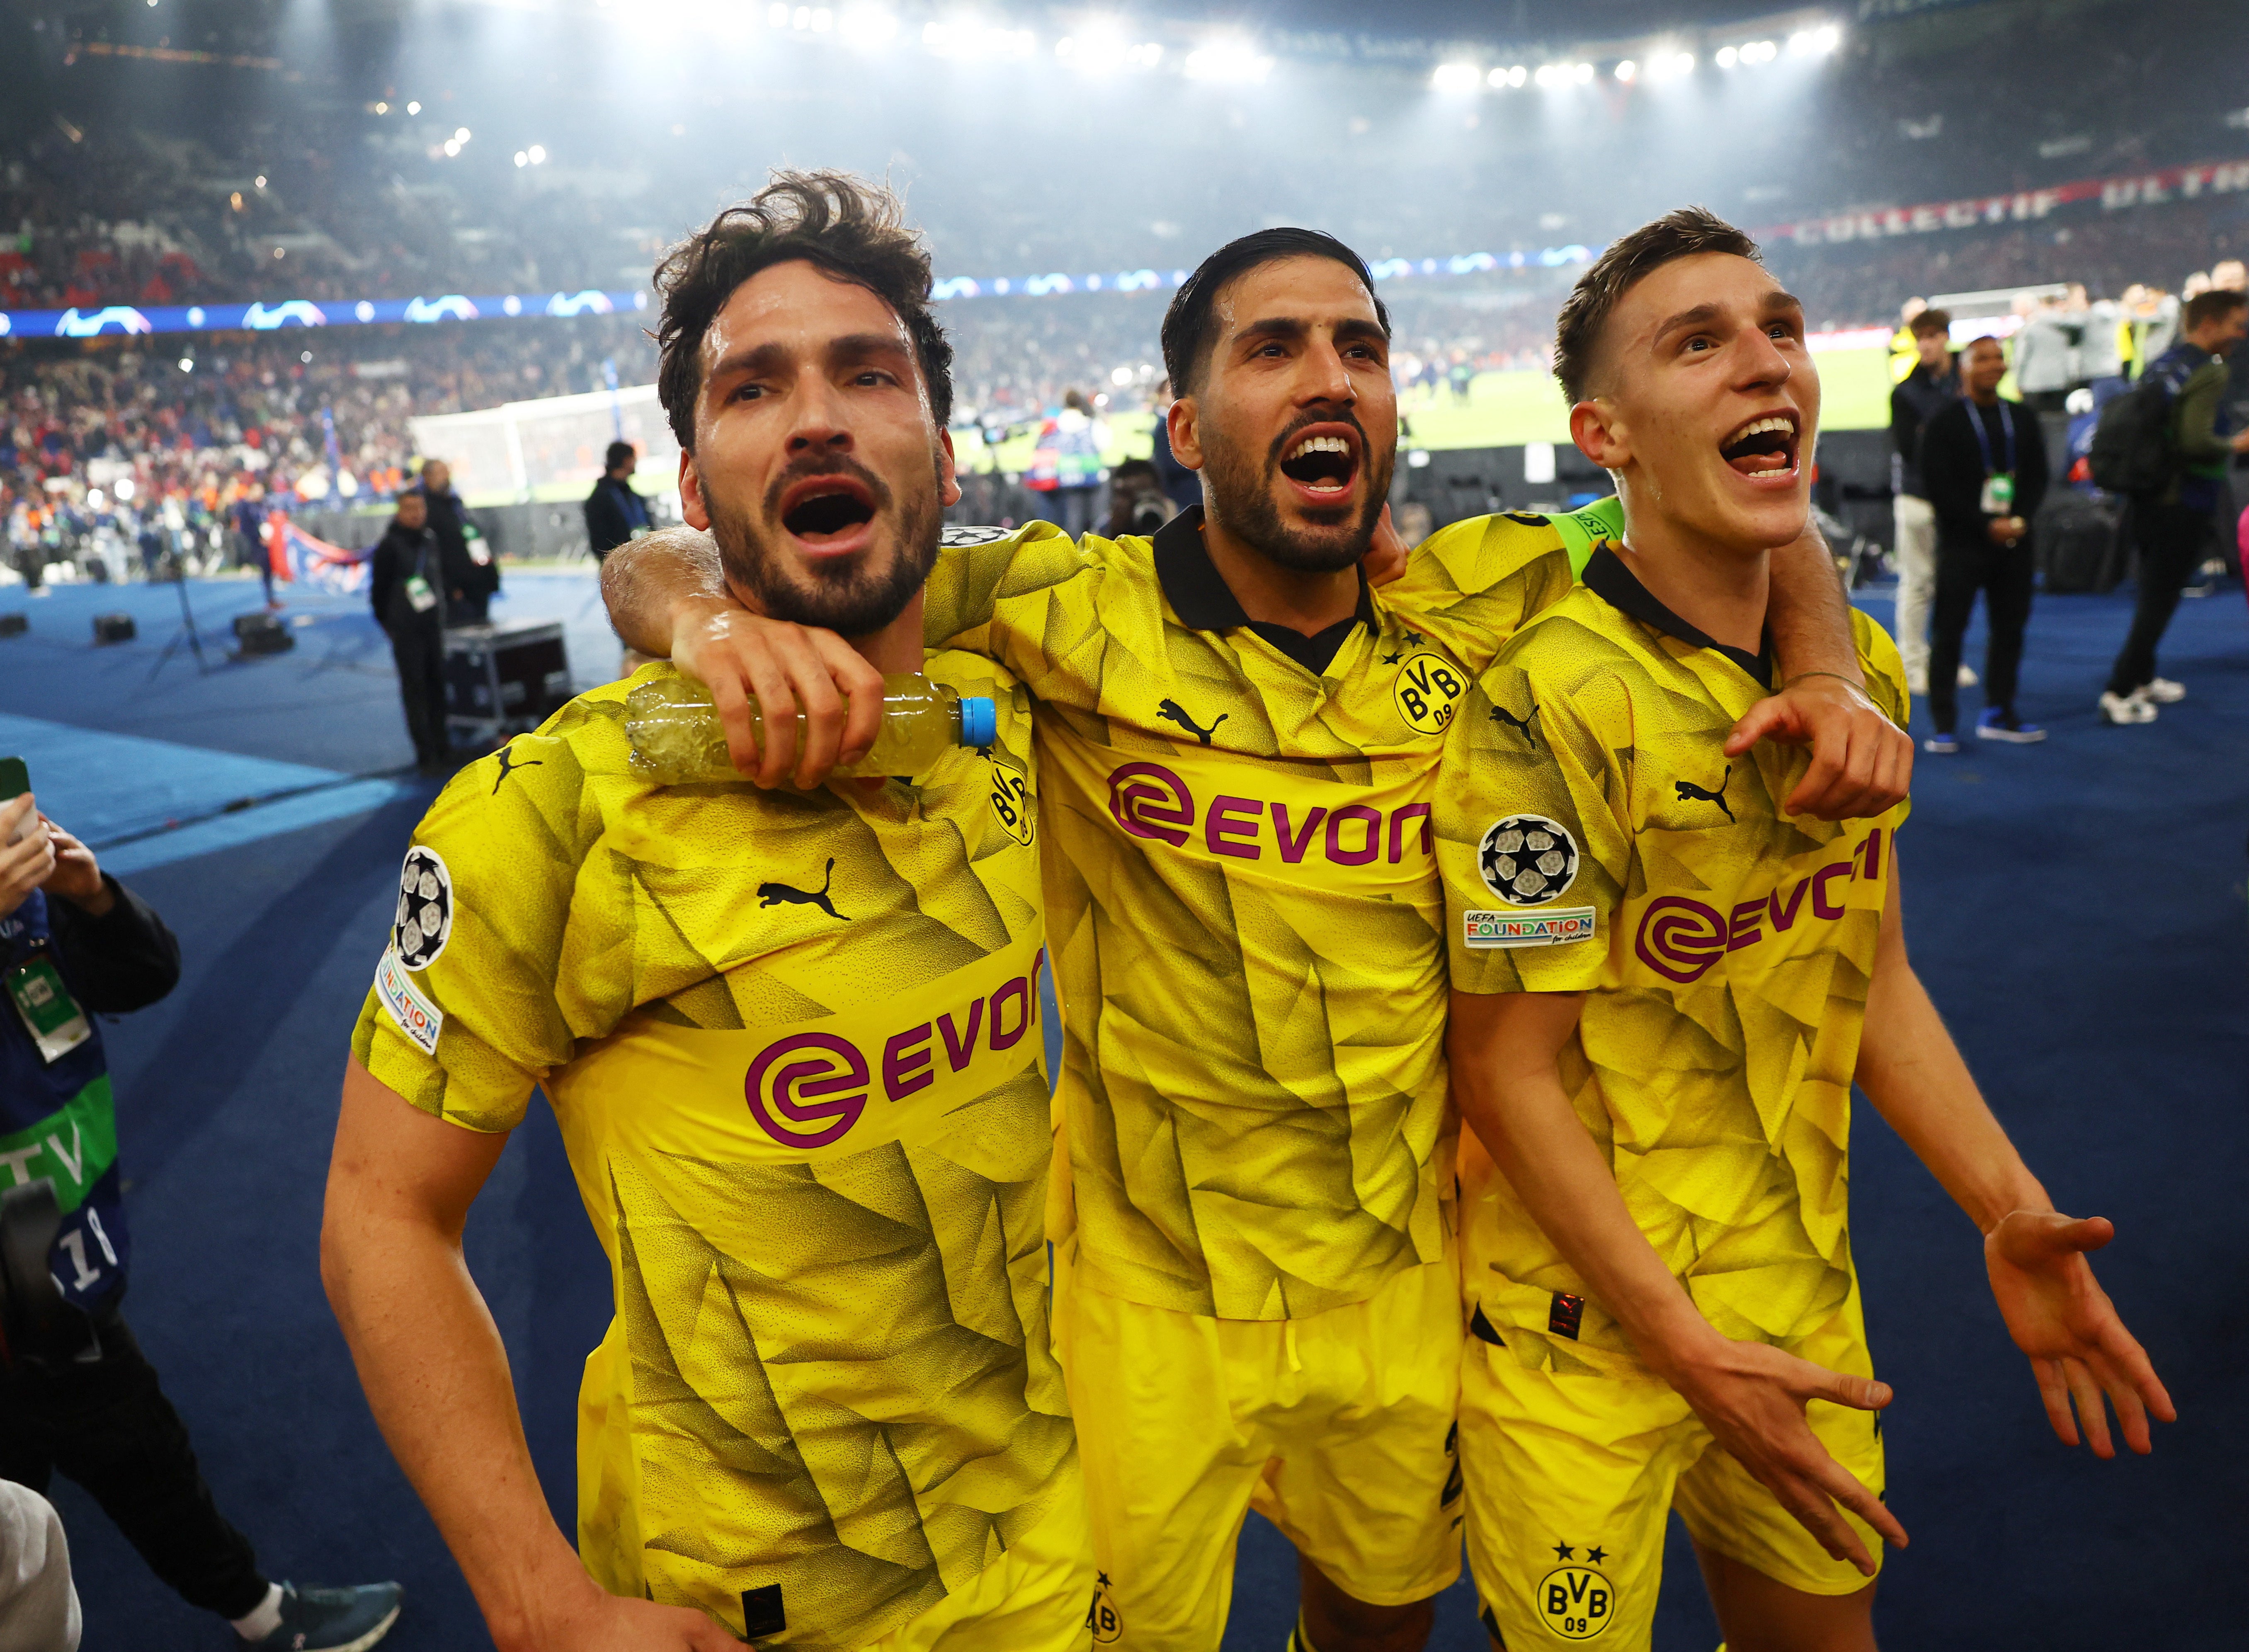 Borussia Dortmund defy odds and financial disparity to reach Europe's grandest stage | The Independent